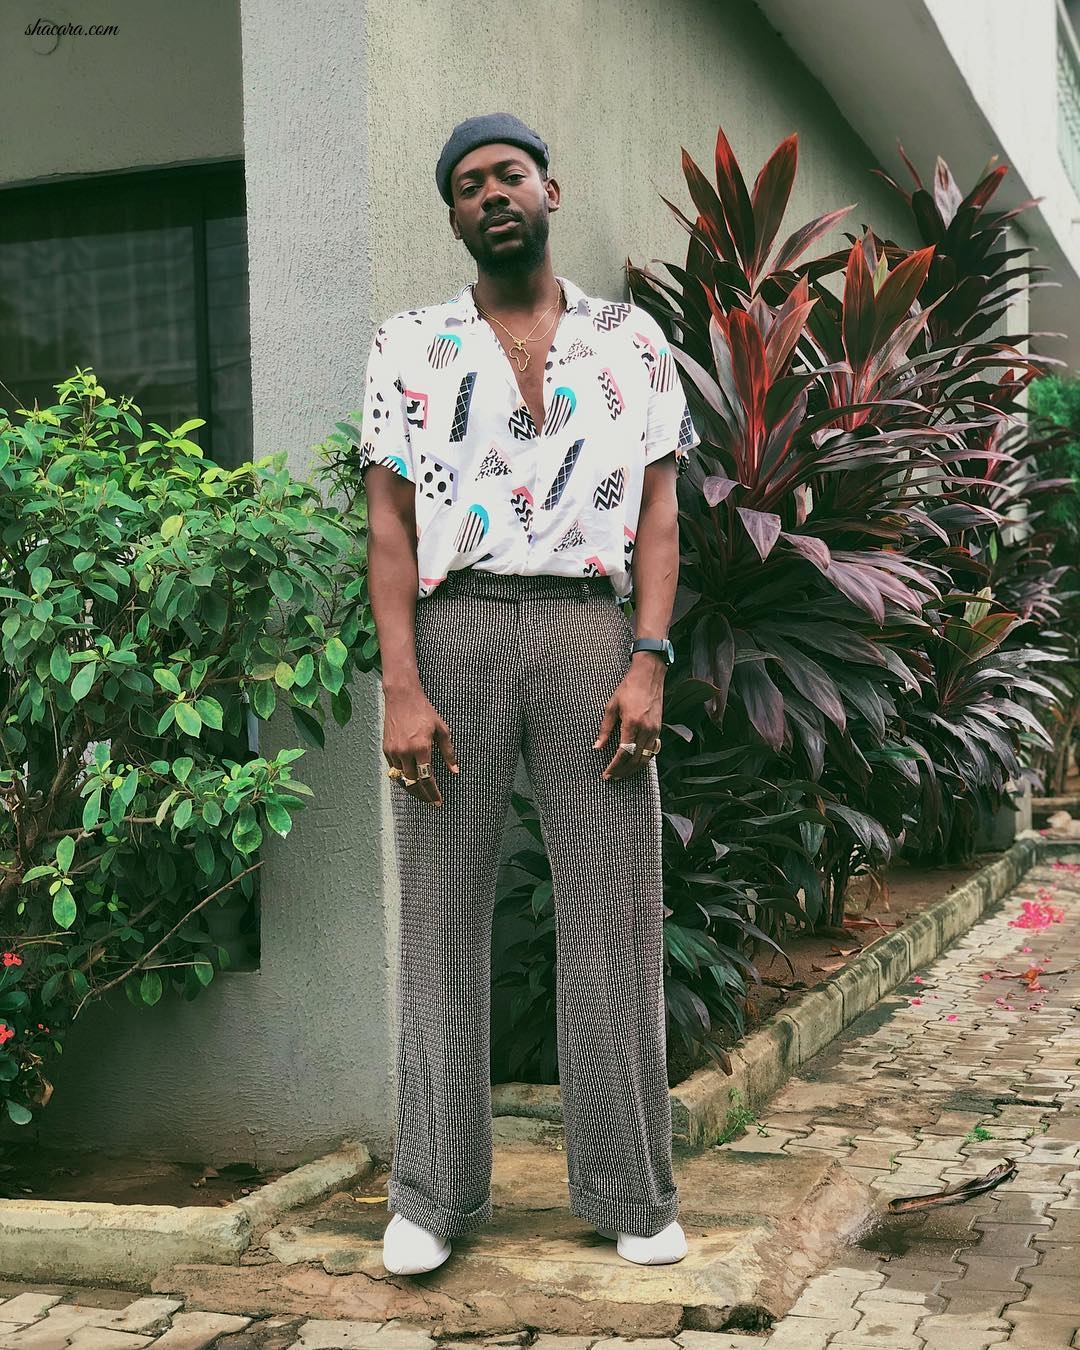 Not Feeling Vintage Fashion Anymore? Adekunle Gold’s Latest Look Will Convince You